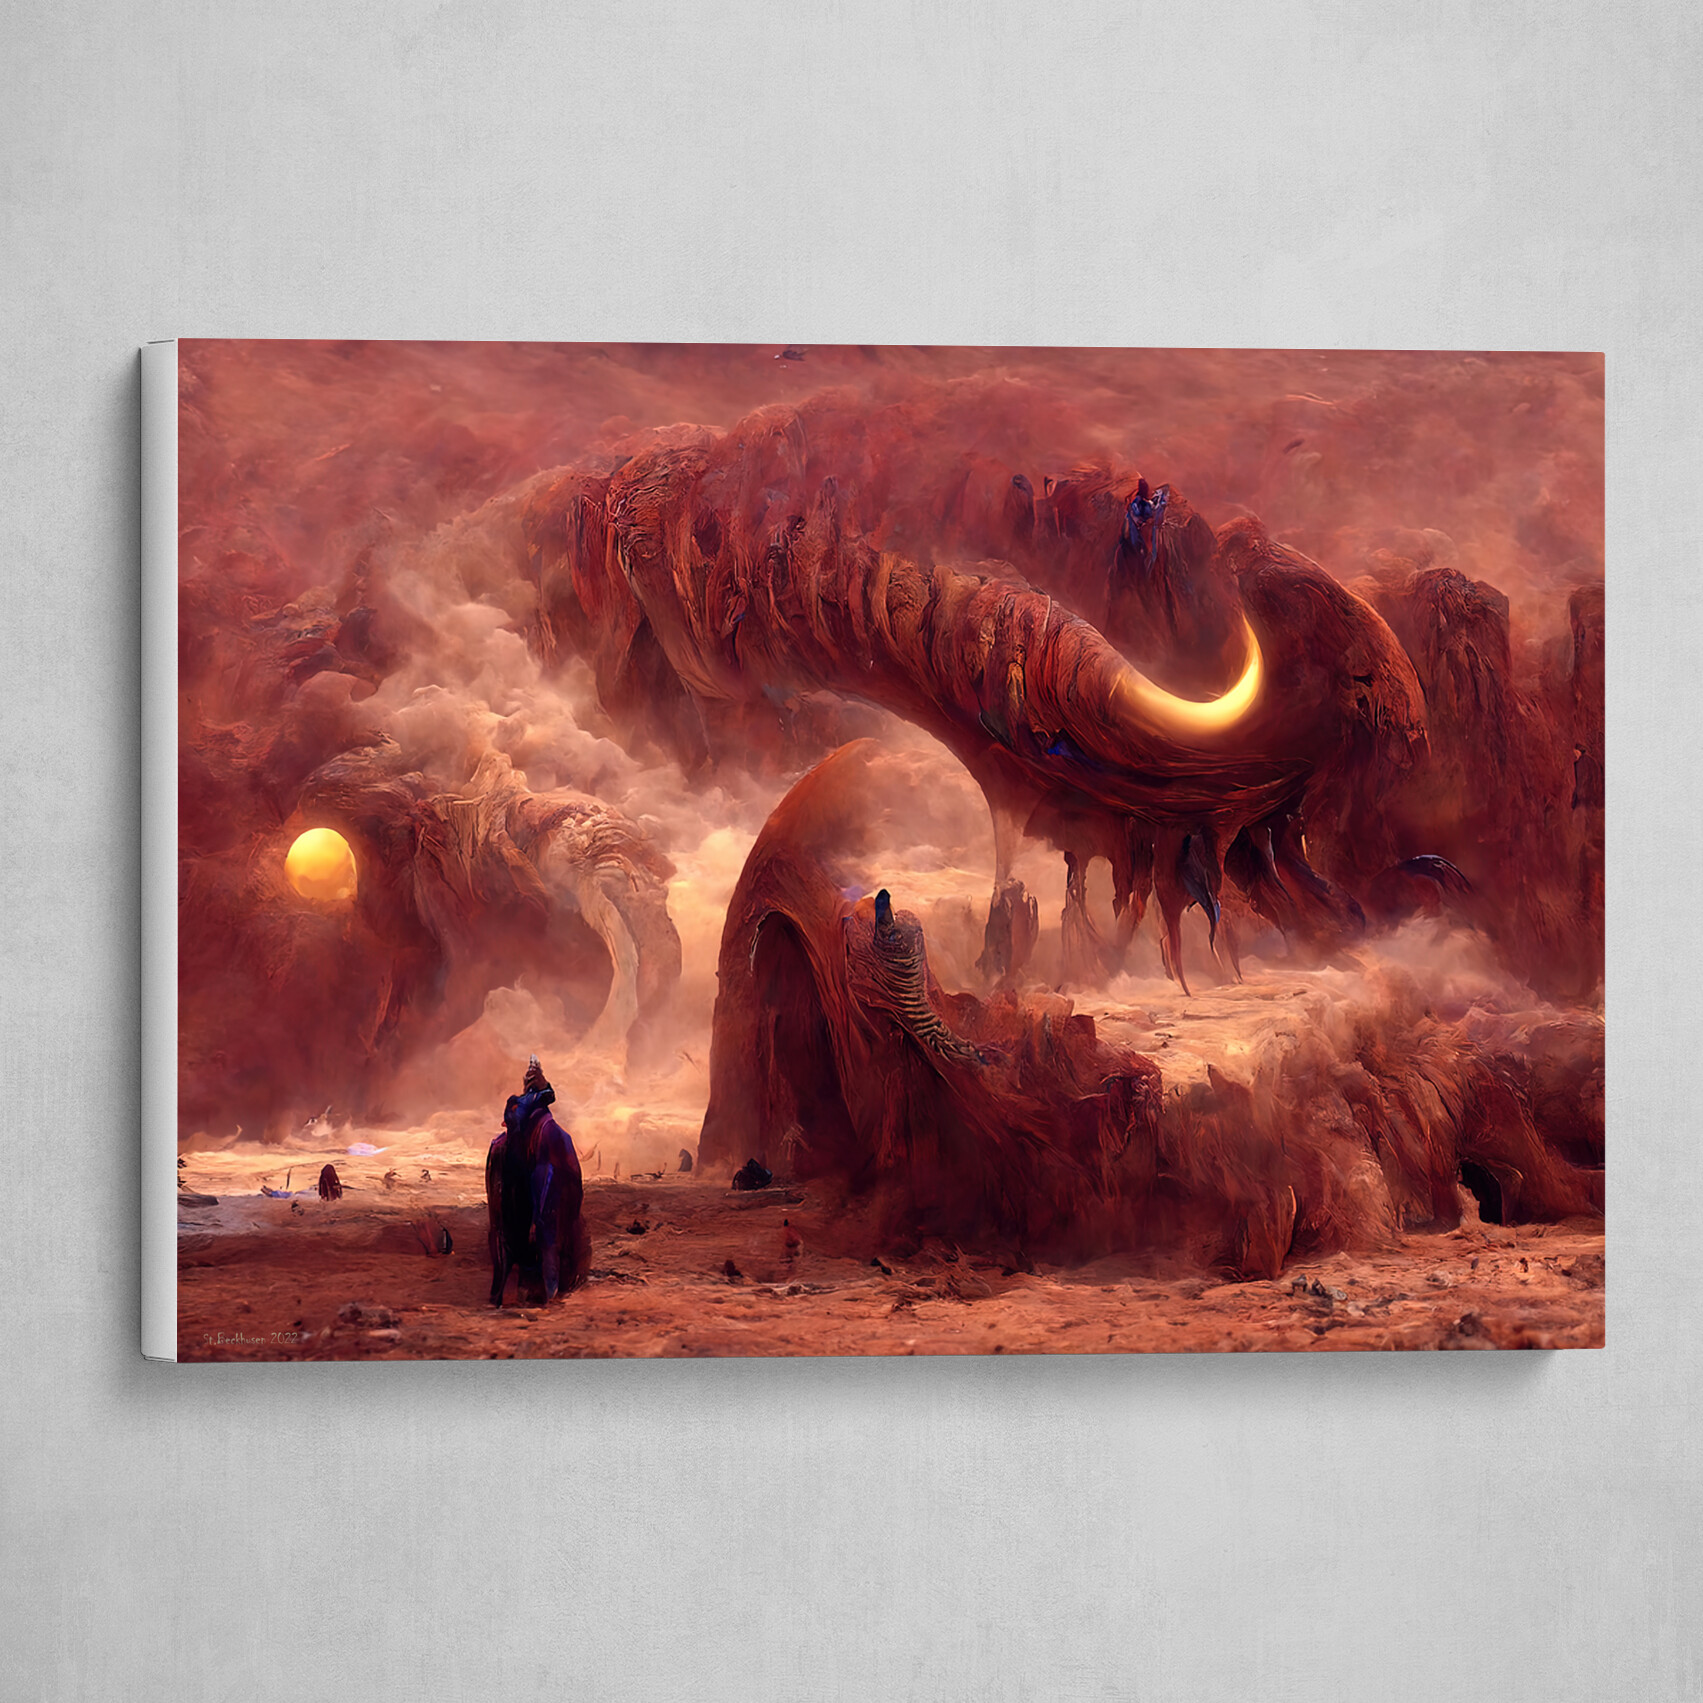 The Prehistoric Dune - Sandworm Entities and their Masters 3.21